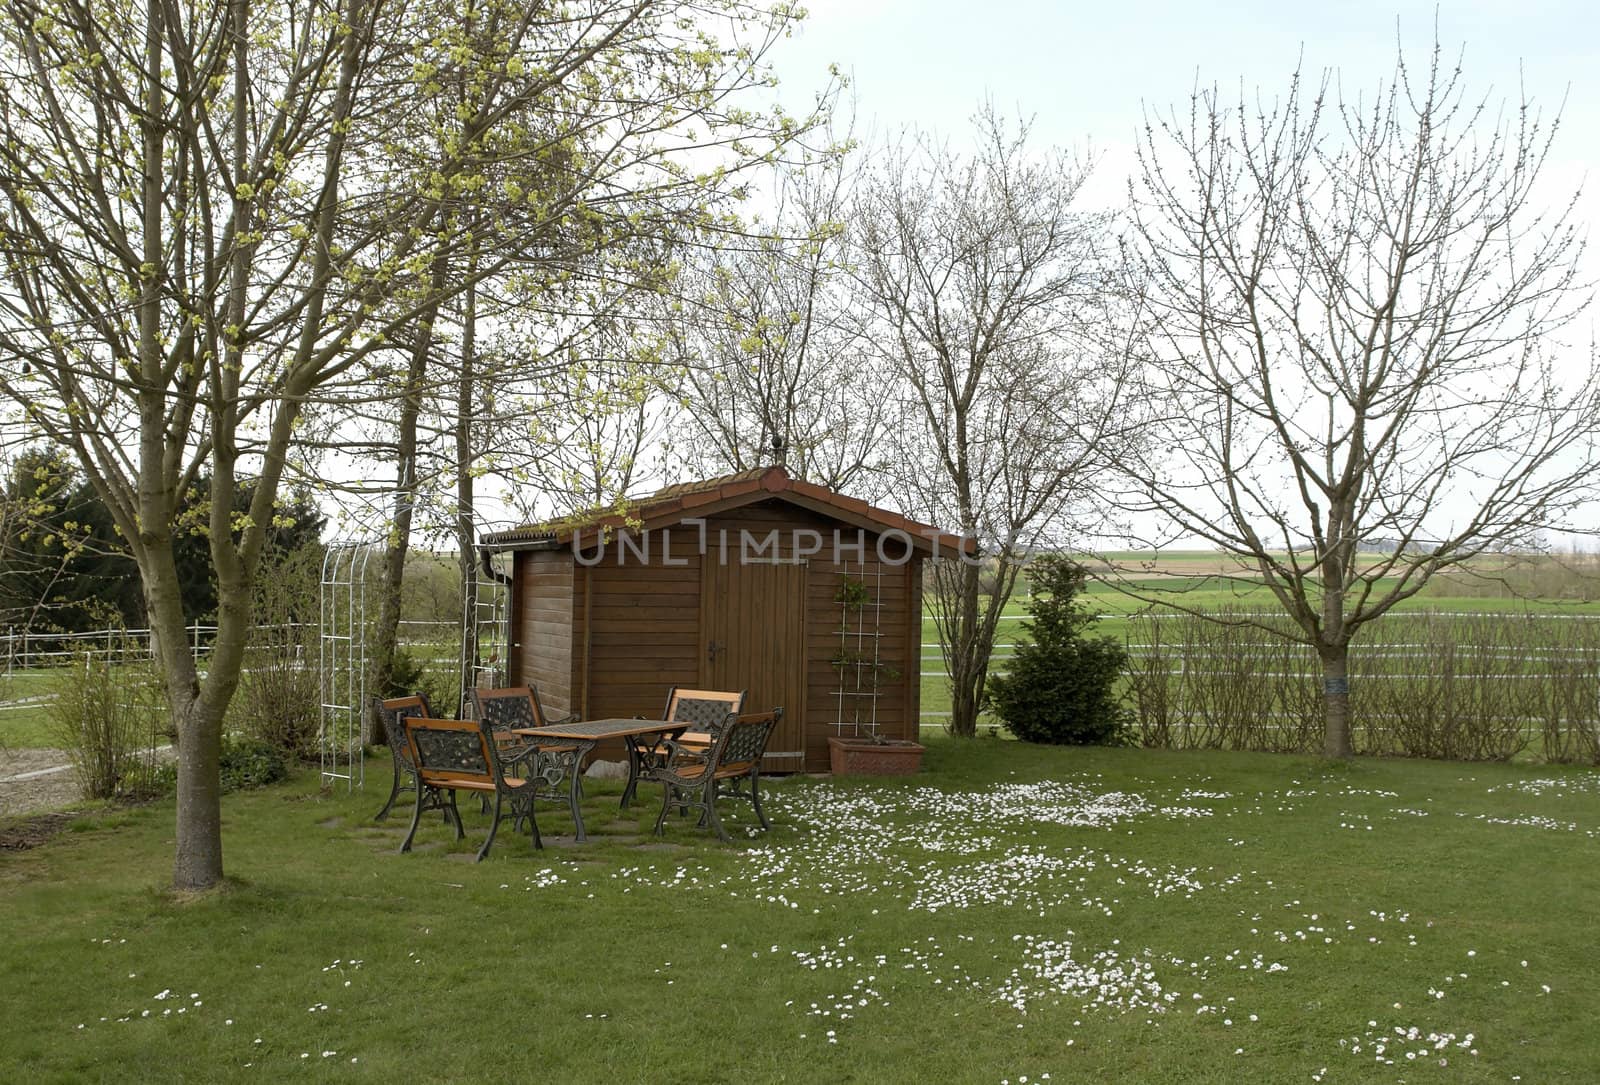 idyllic summerhouse and garden furniture at spring time